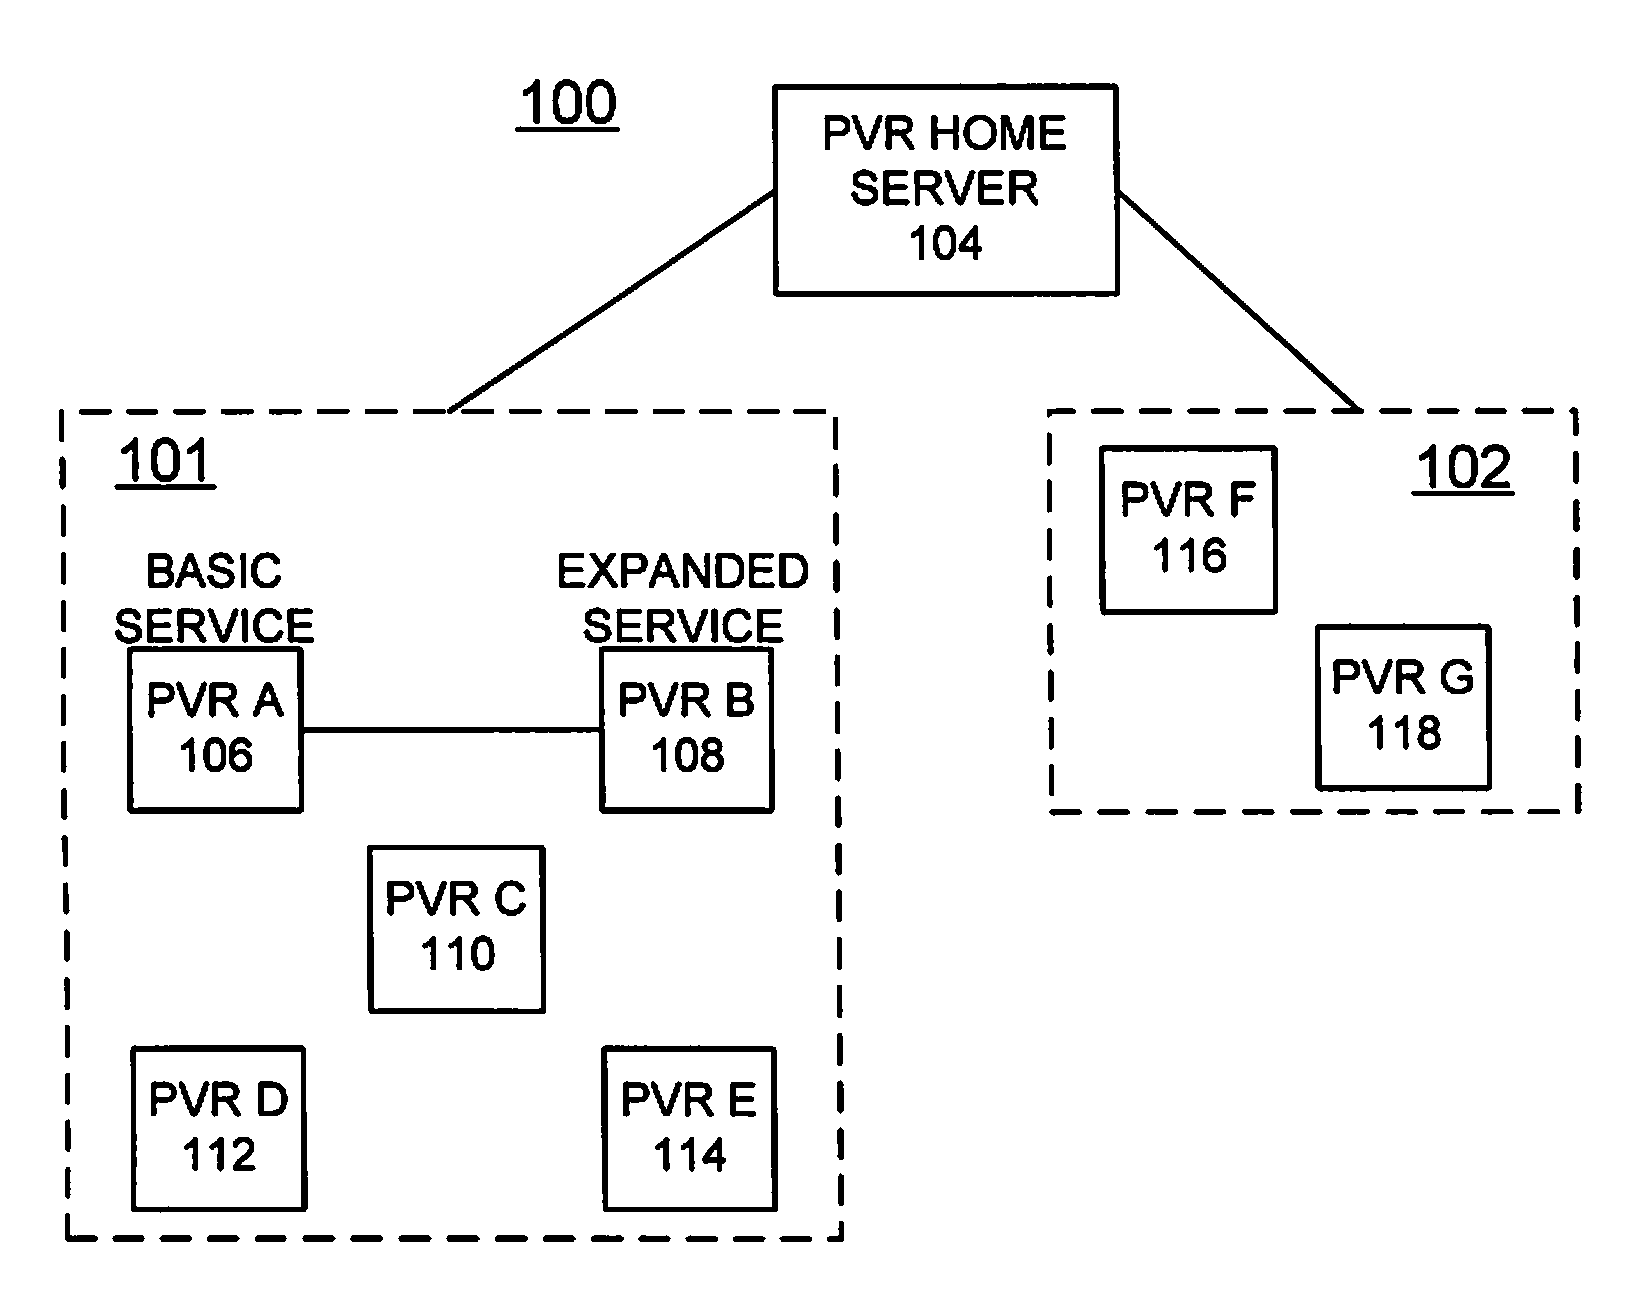 Method for implementing on-demand pvr peer-to-peer media sharing with content restraint